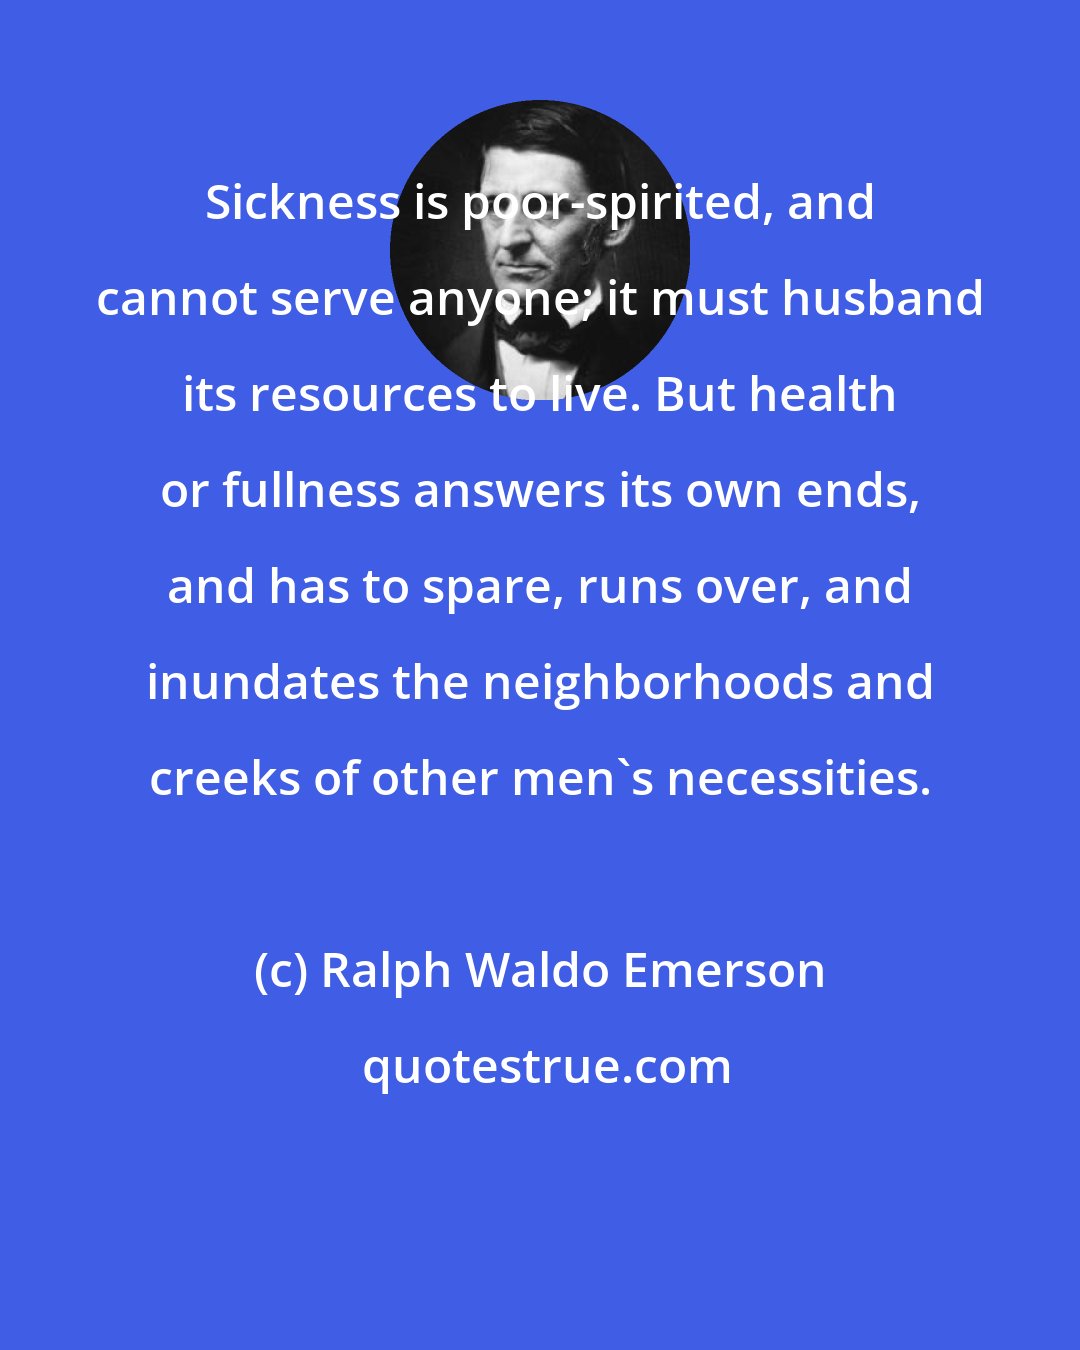 Ralph Waldo Emerson: Sickness is poor-spirited, and cannot serve anyone; it must husband its resources to live. But health or fullness answers its own ends, and has to spare, runs over, and inundates the neighborhoods and creeks of other men's necessities.